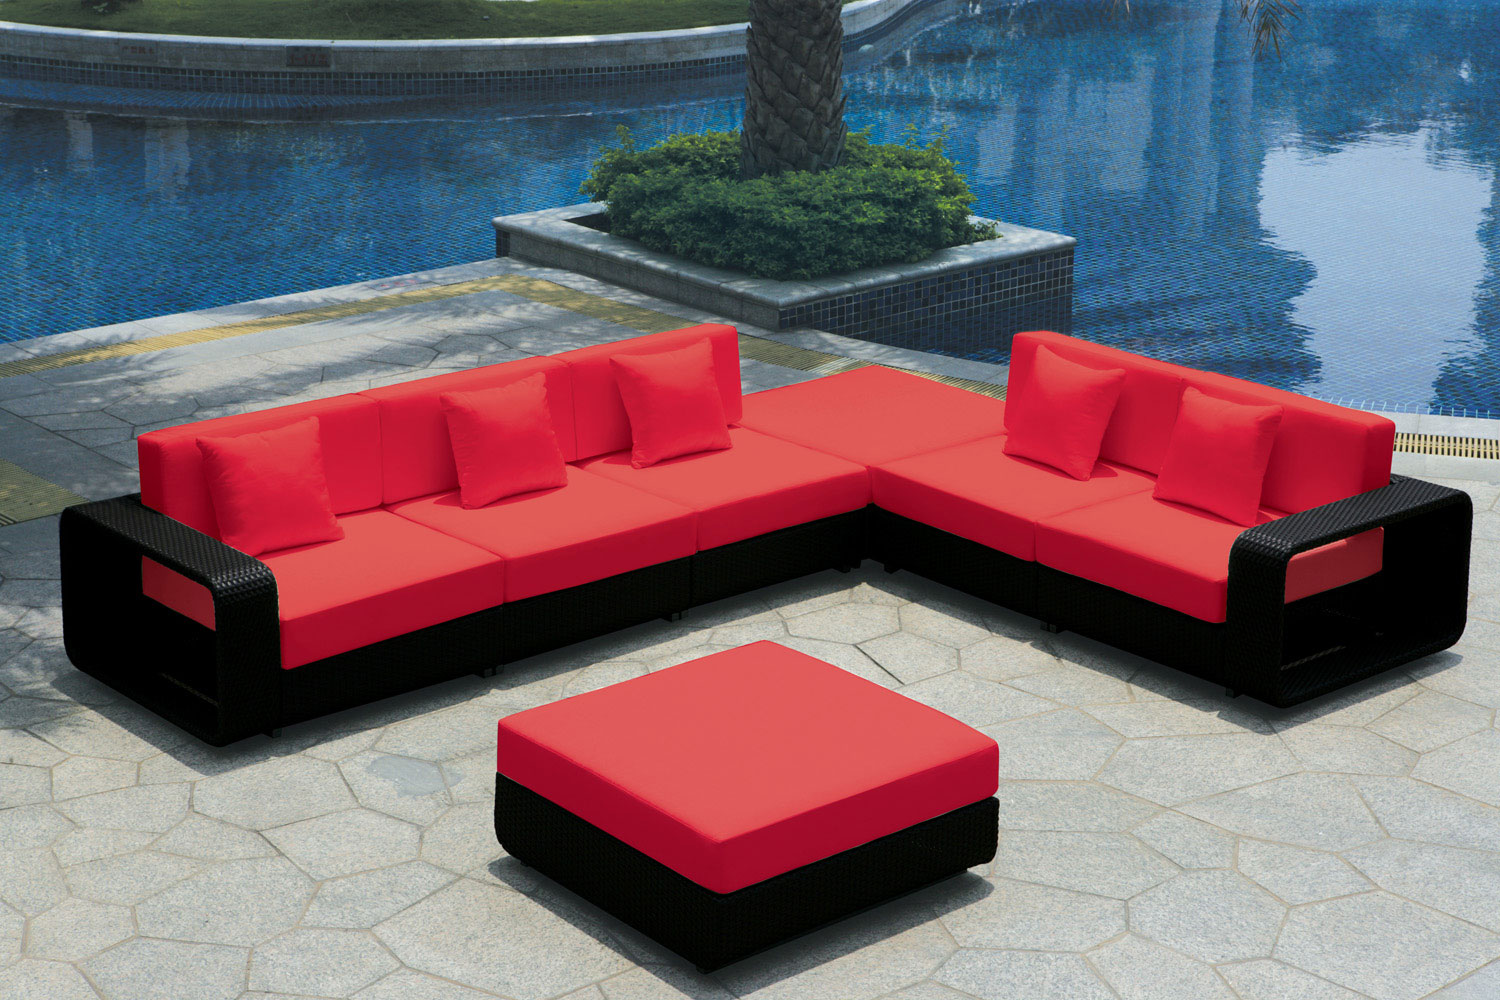 Outdoor Furniture Red Contemporary Outdoor Furniture Design With Red Sofa And Sofa Pillow In The Pool Edge Decoration With Honeycomb Flooring Furniture Contemporary Outdoor Furniture As A Companion To Nature